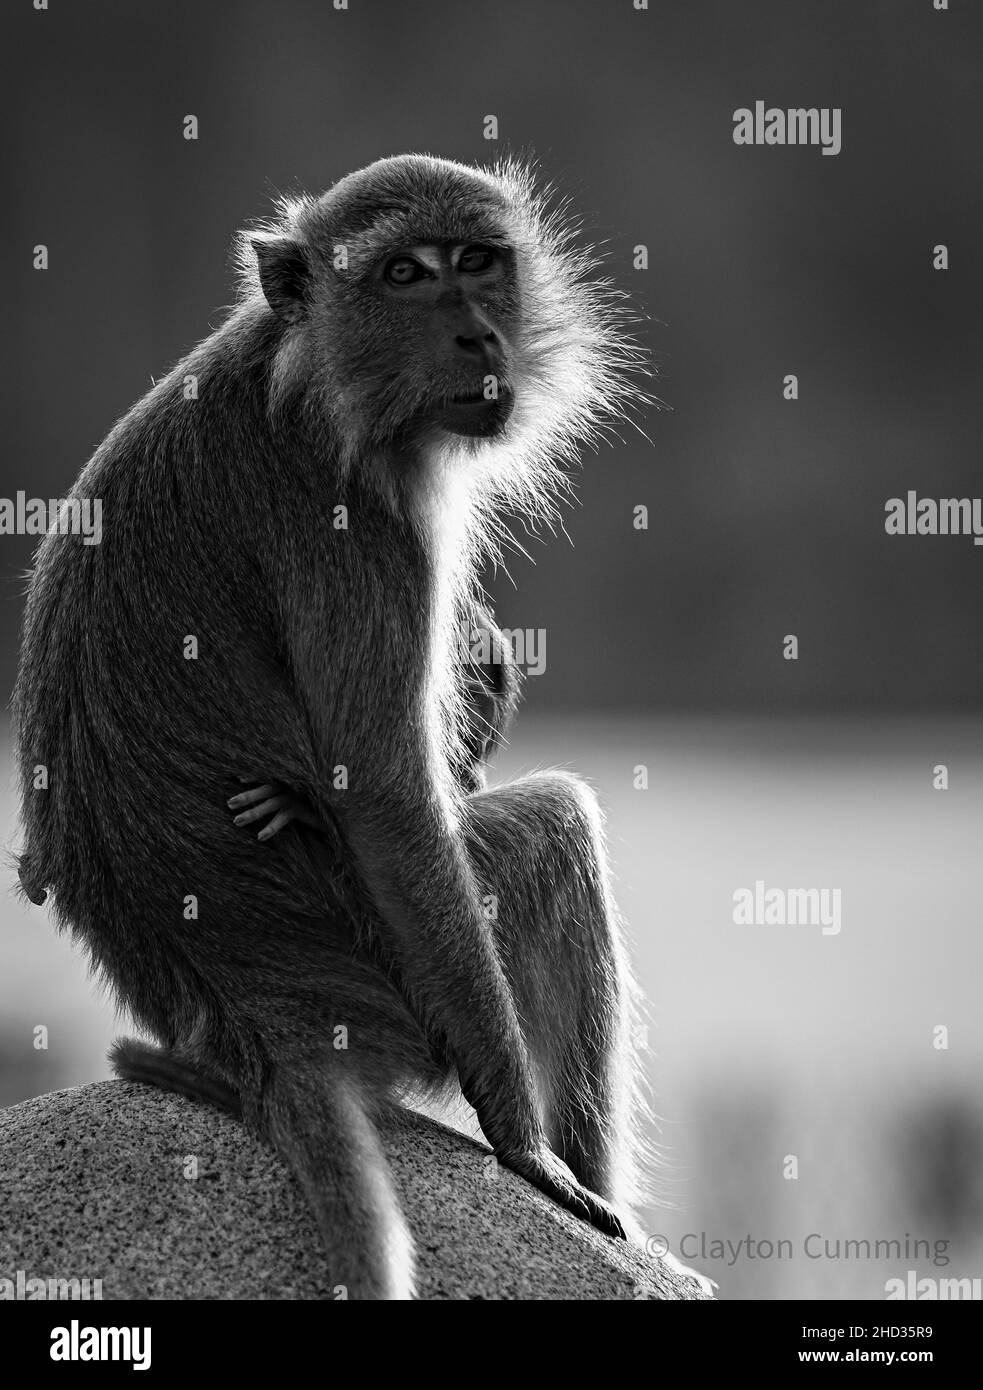 Vertical shot of a macaque monkey in black and white with a blurry background Stock Photo